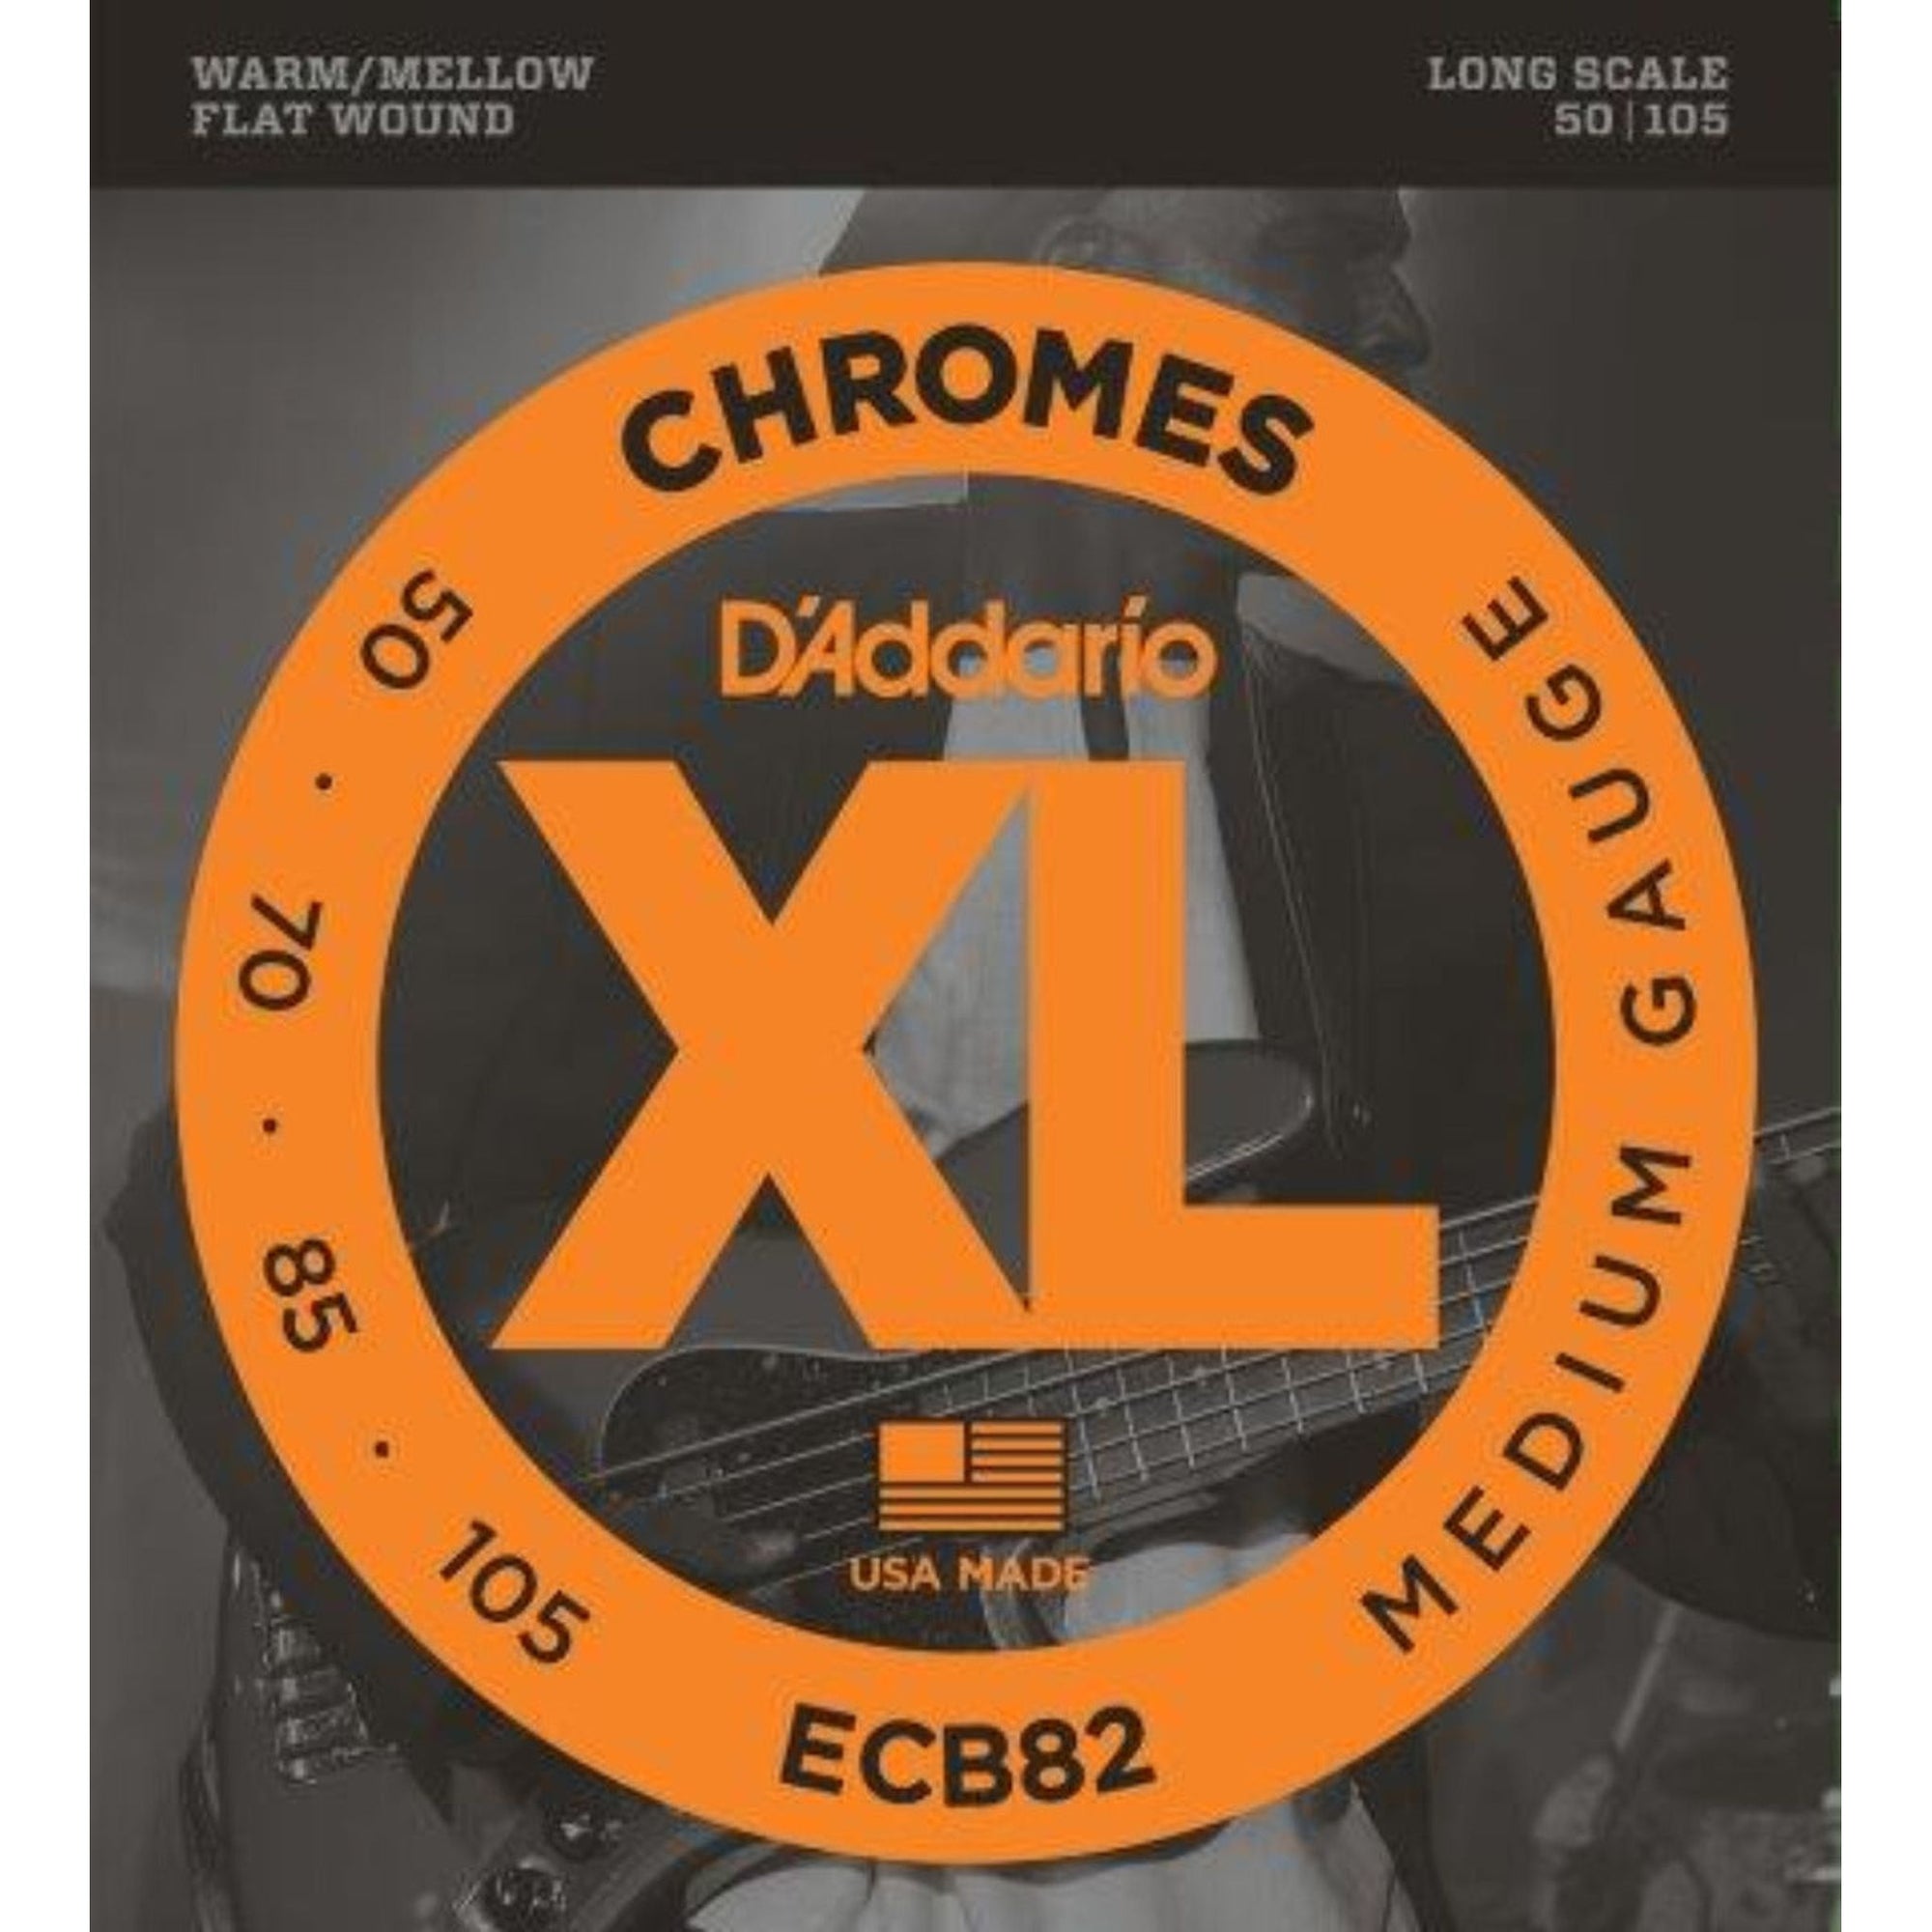 ECB82, D'Addario's heaviest Flatwound bass strings, are known for their warm, mellow tone and smooth polished feel. 